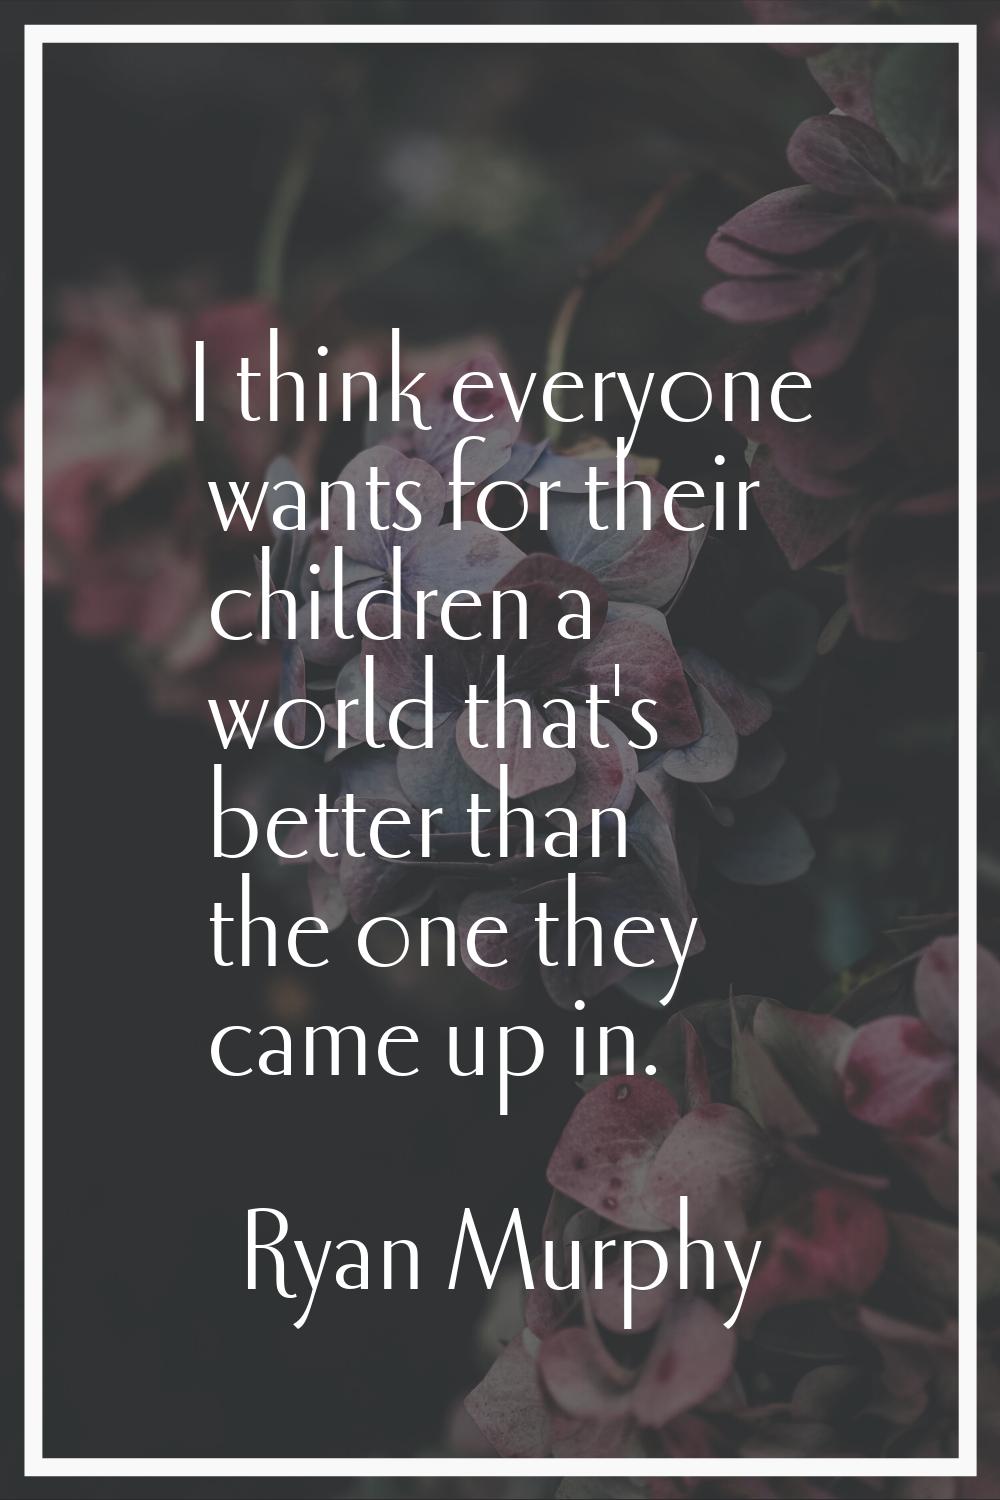 I think everyone wants for their children a world that's better than the one they came up in.